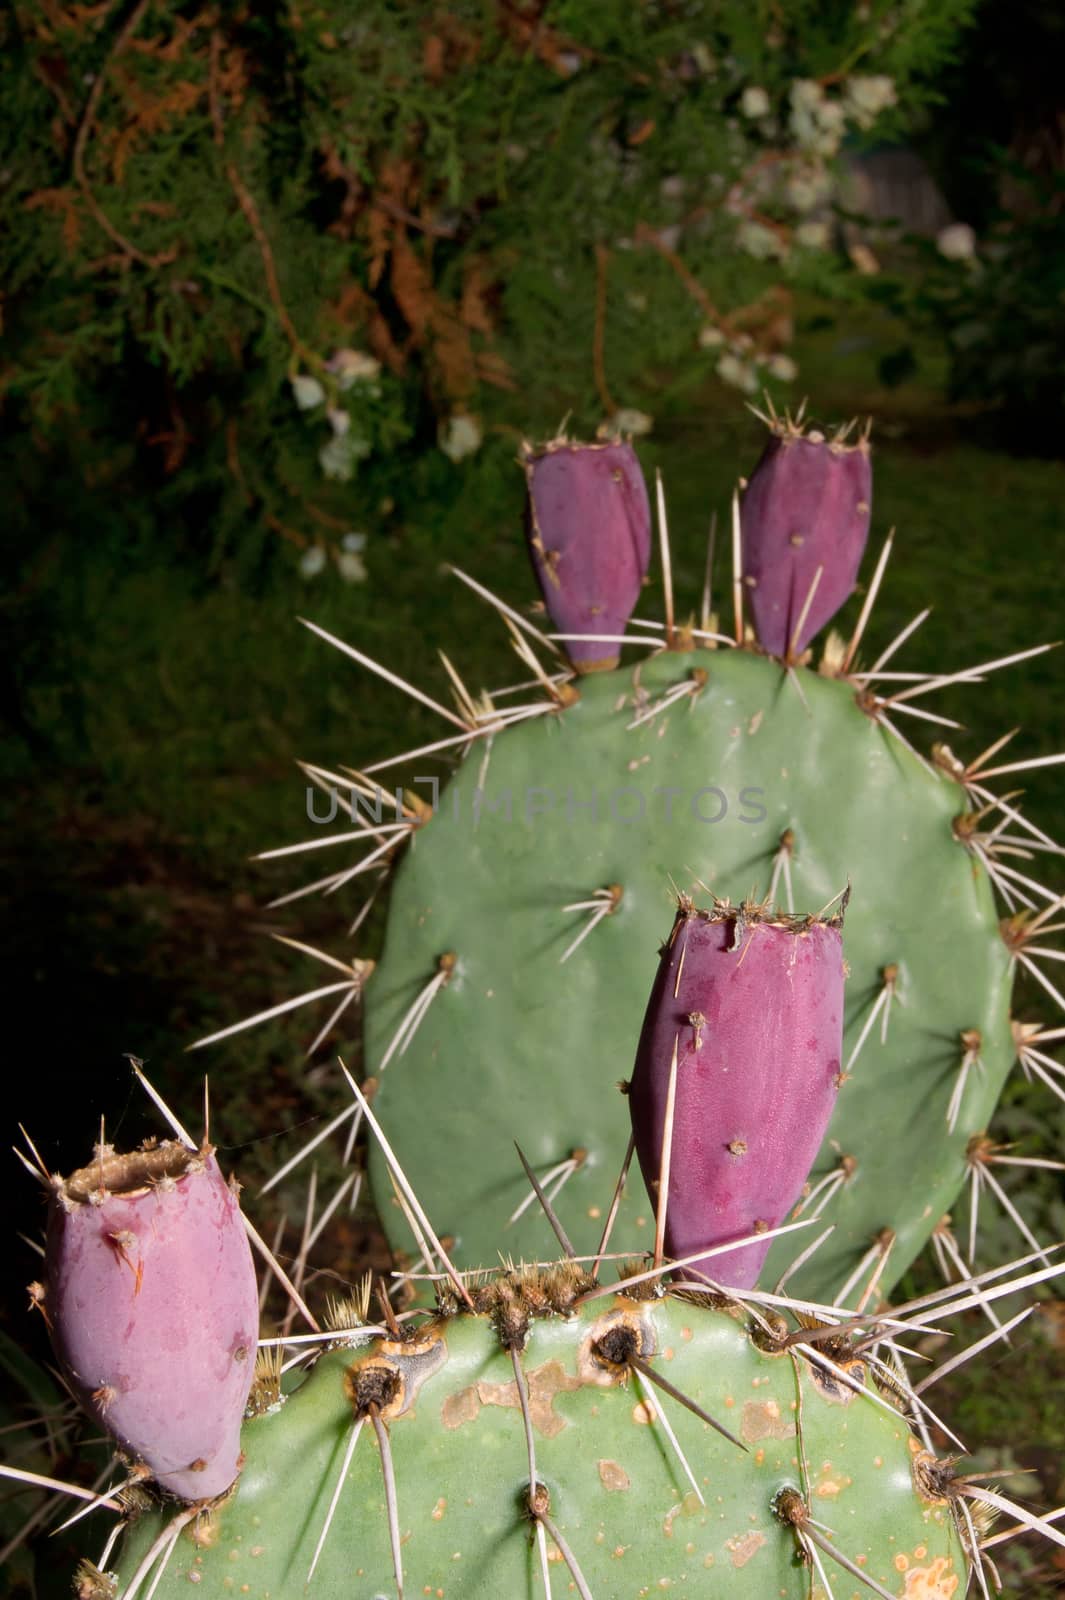 Prickly pear (Opuntia ficus-indica) fruit is edible.